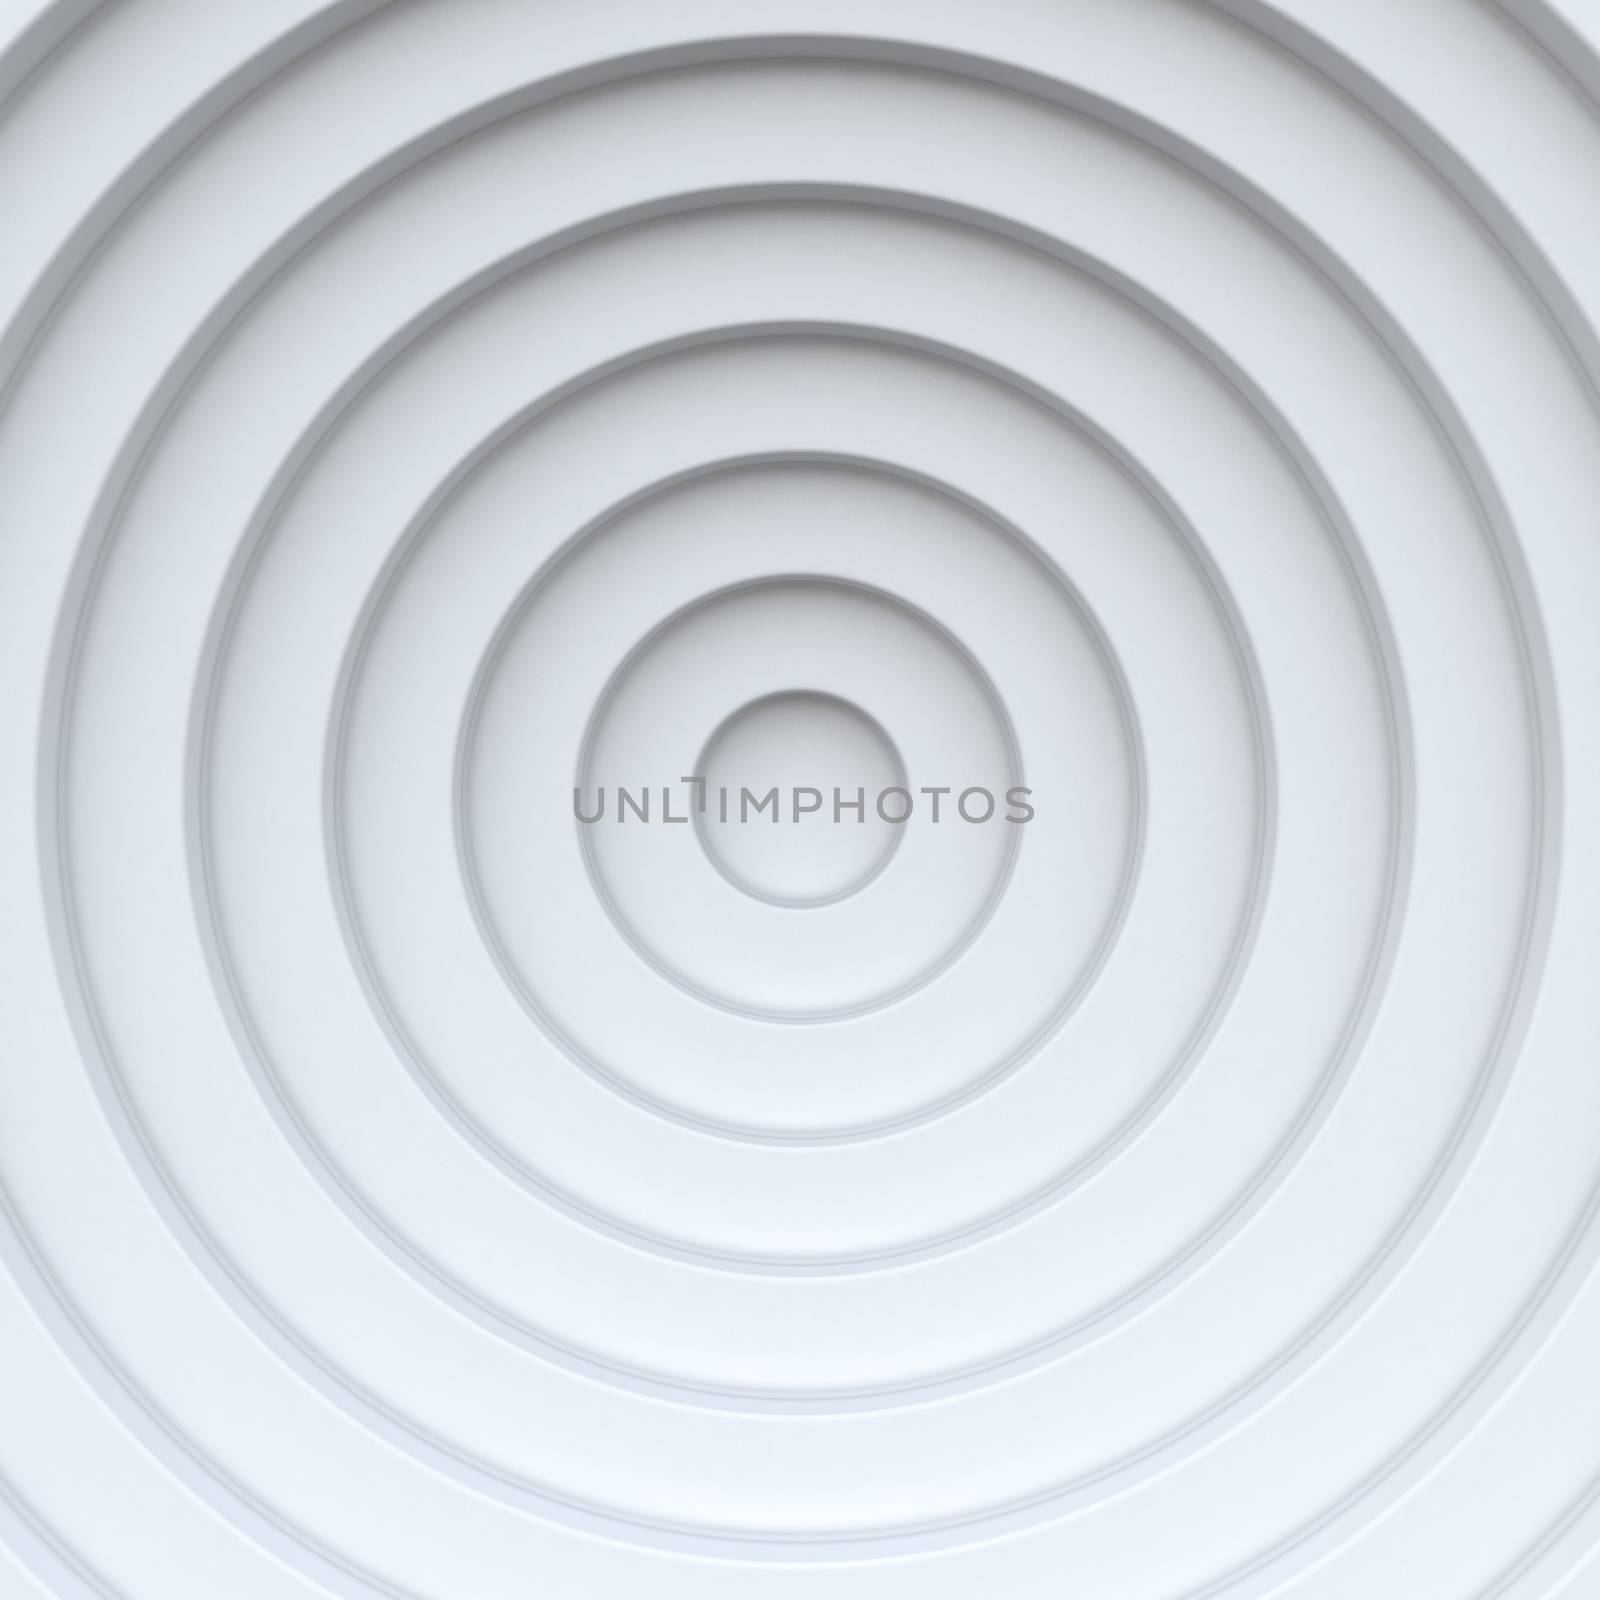 White concentric circle abstract background 3D render illustration